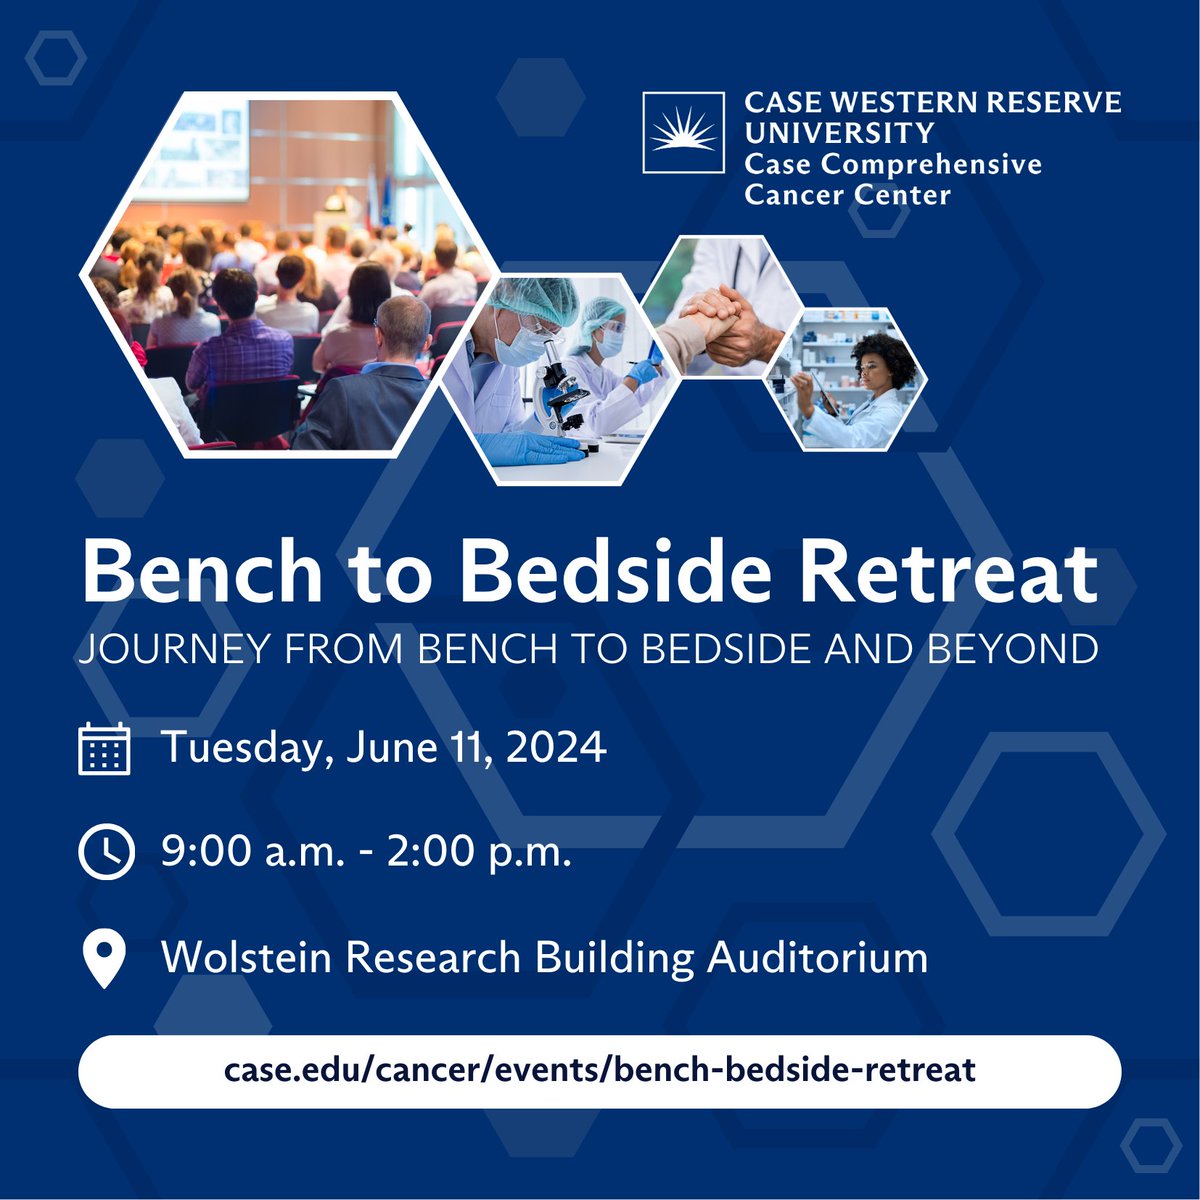 Case CCC's Bench to Bedside retreat is only one month away! Learn more and register to attend at case.edu/cancer/events/….